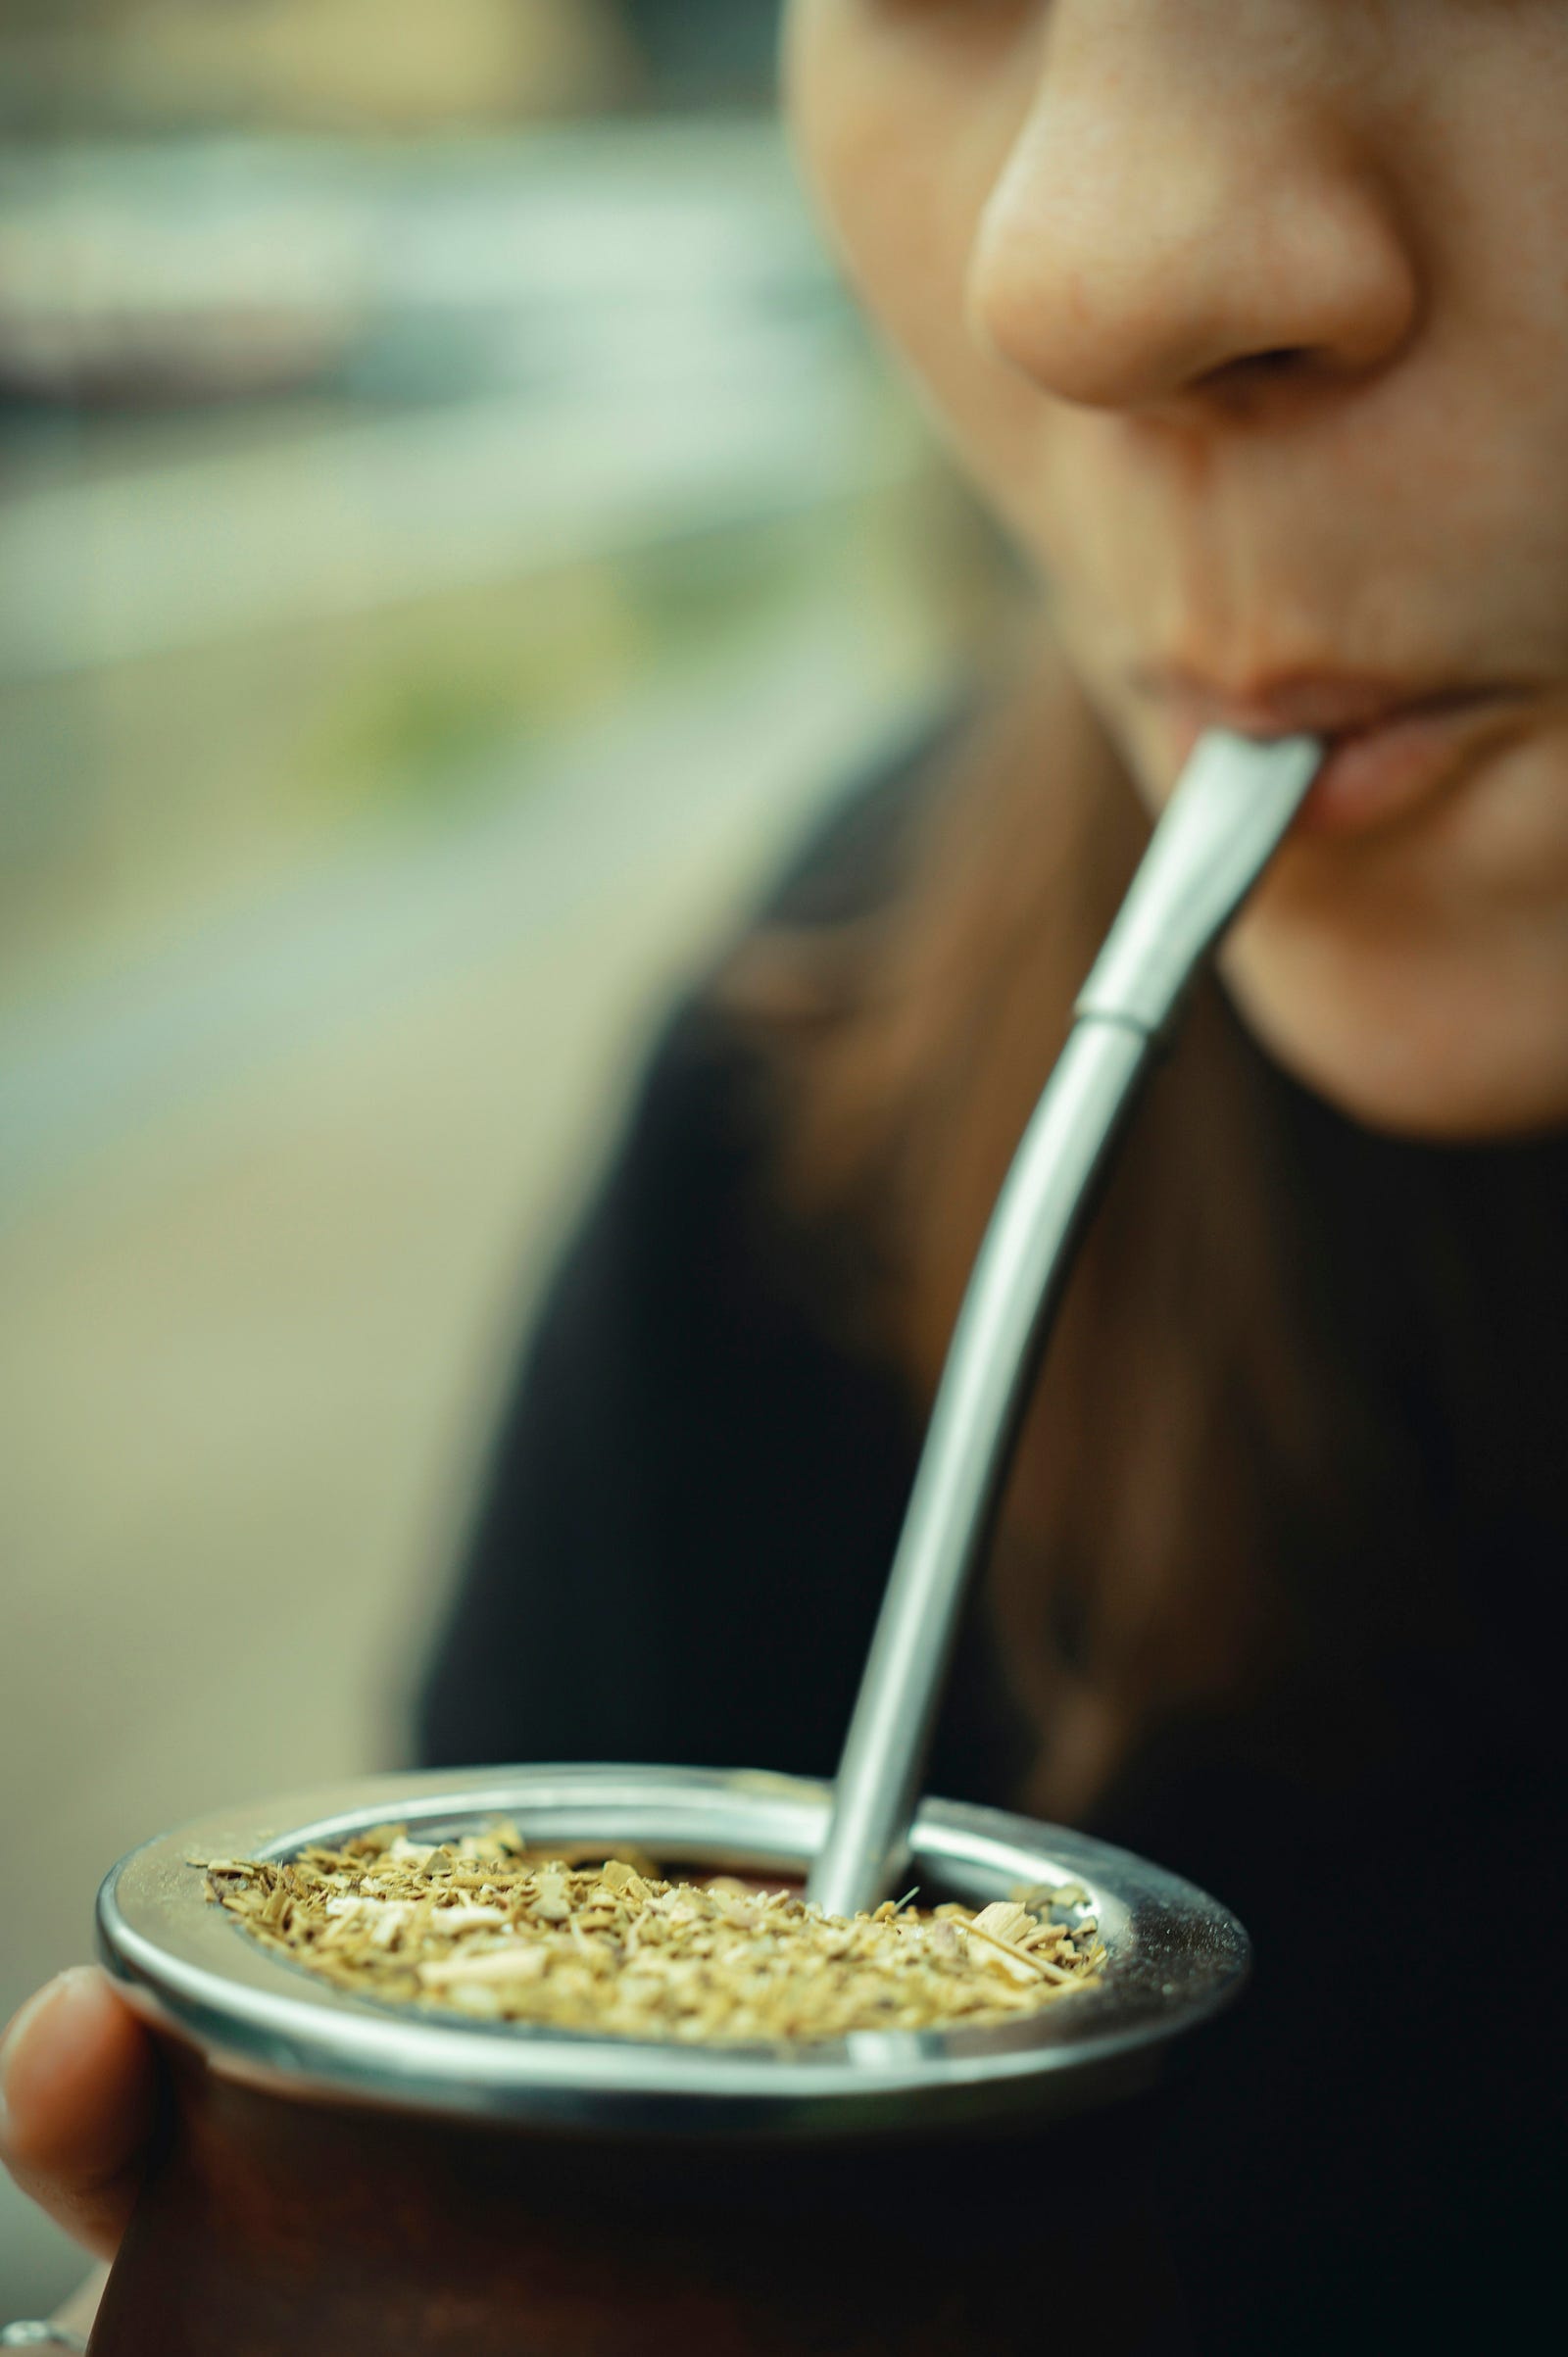 A woman sips on a cup of mate. The high temperatures of the beverage may increase cancer risk.